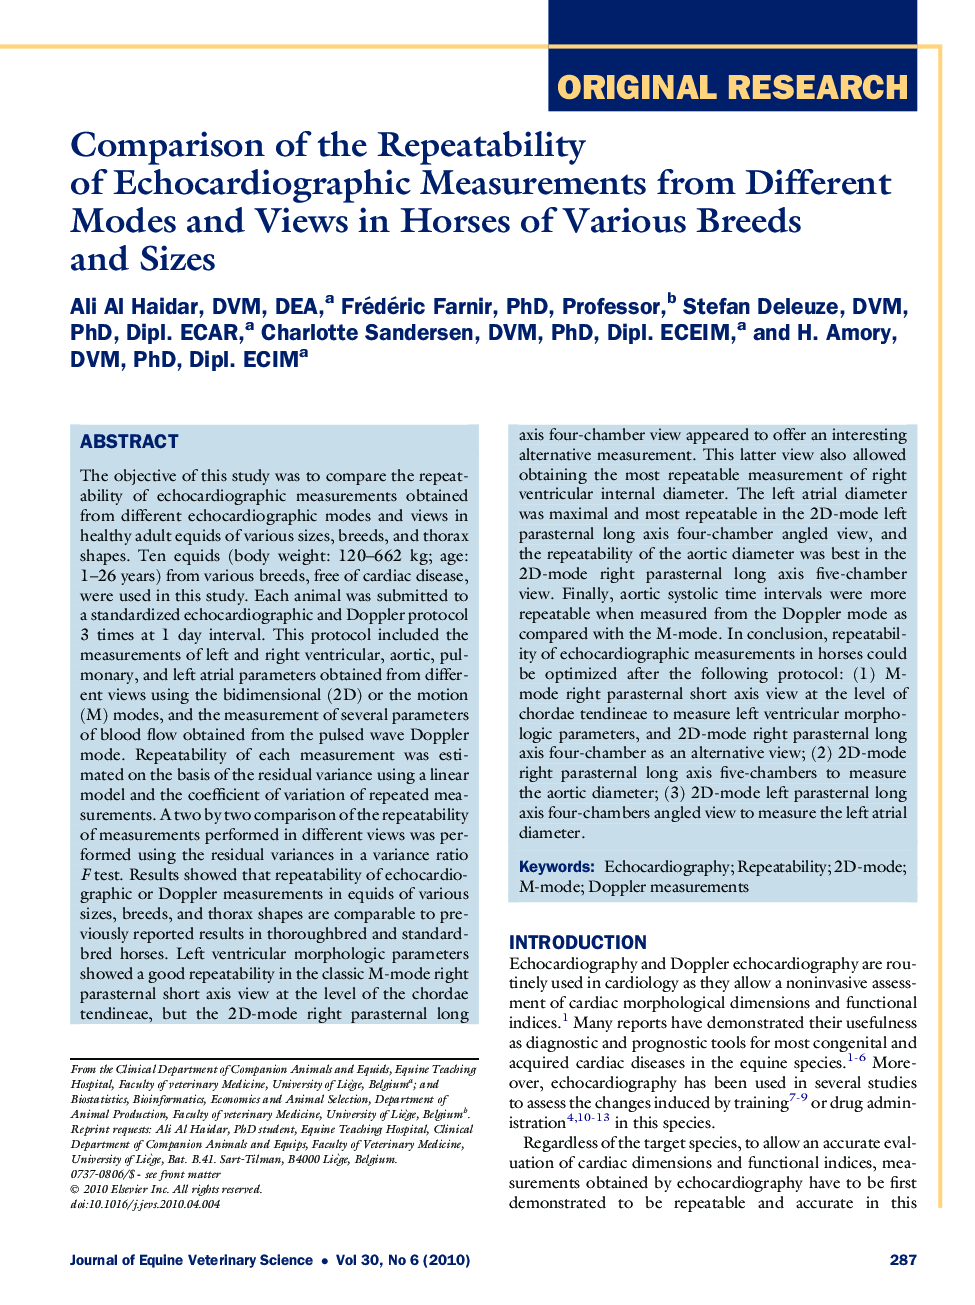 Comparison of the Repeatability of Echocardiographic Measurements from Different Modes and Views in Horses of Various Breeds and Sizes